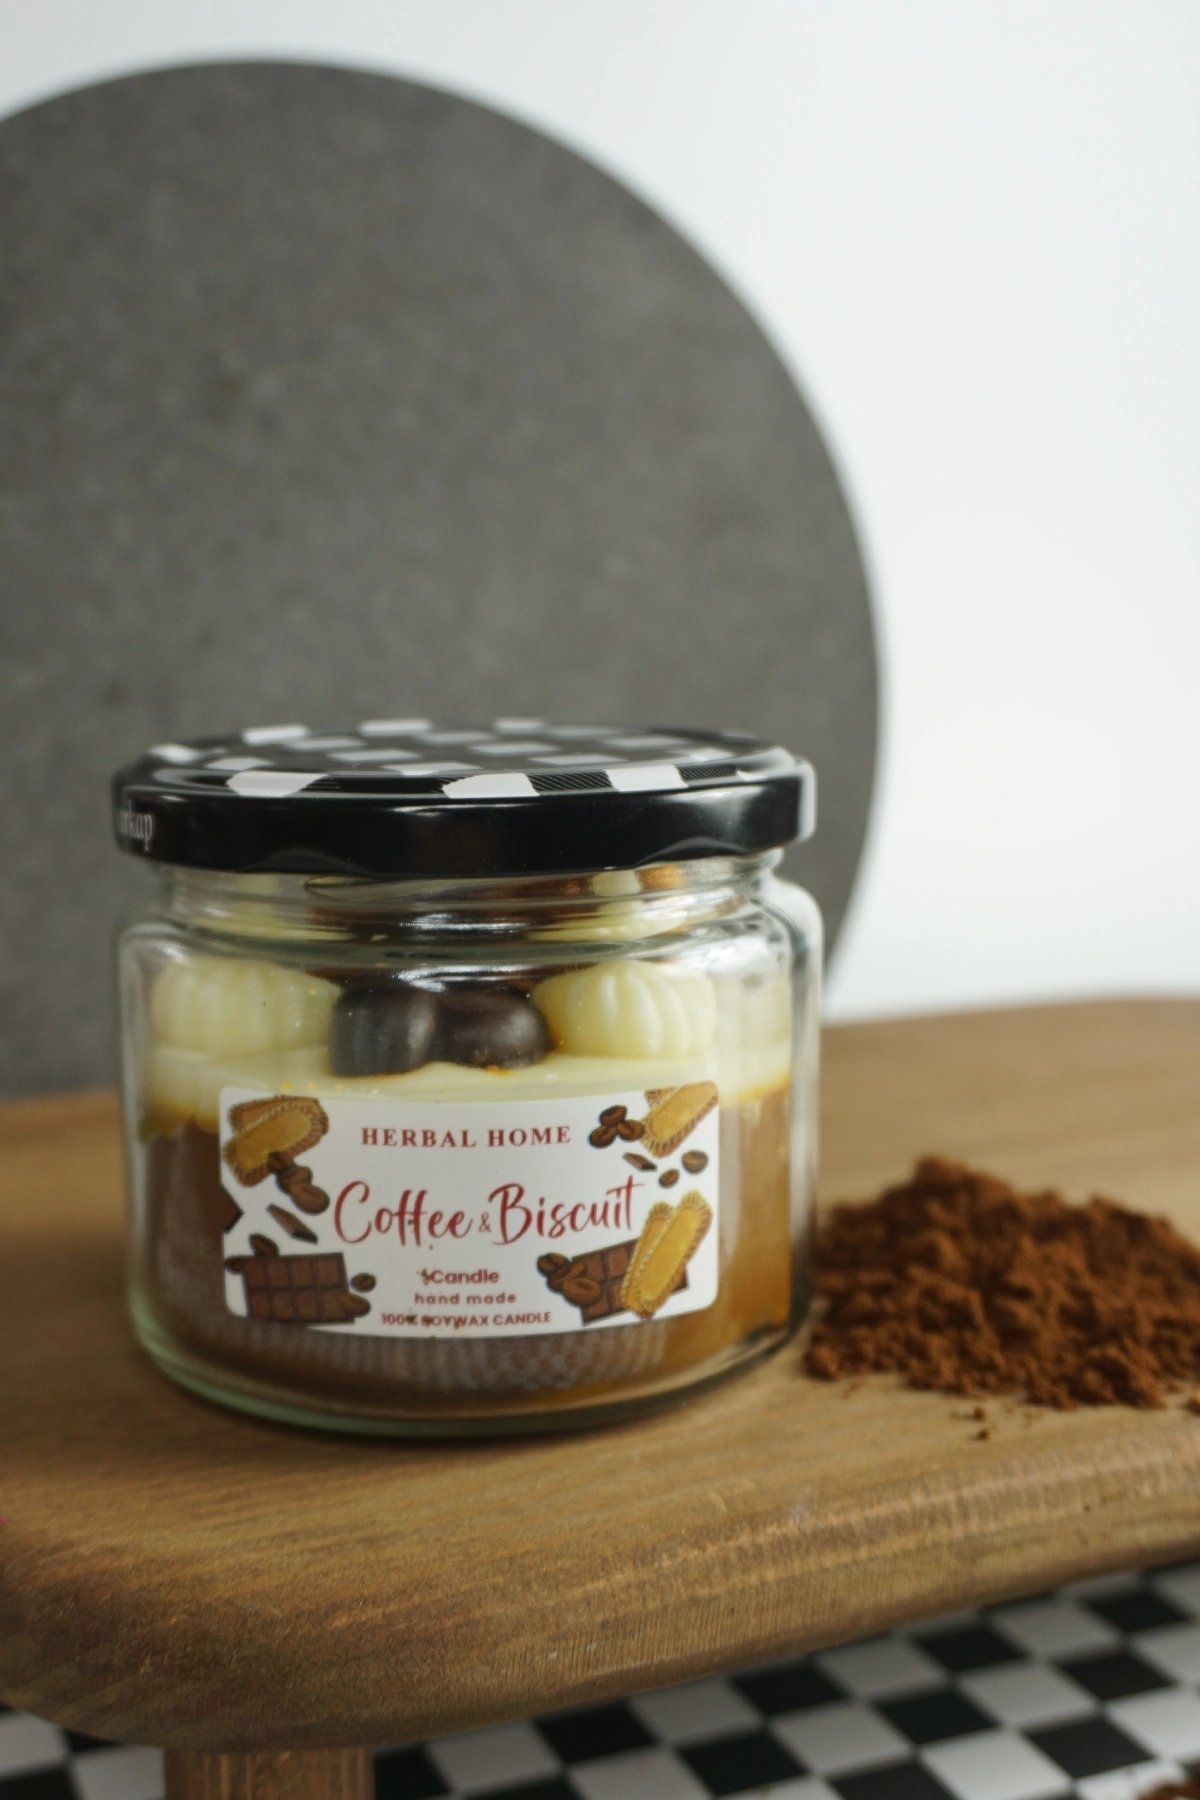 HERBAL HOME Coffee and Biscuit Candle 220 GR - 6